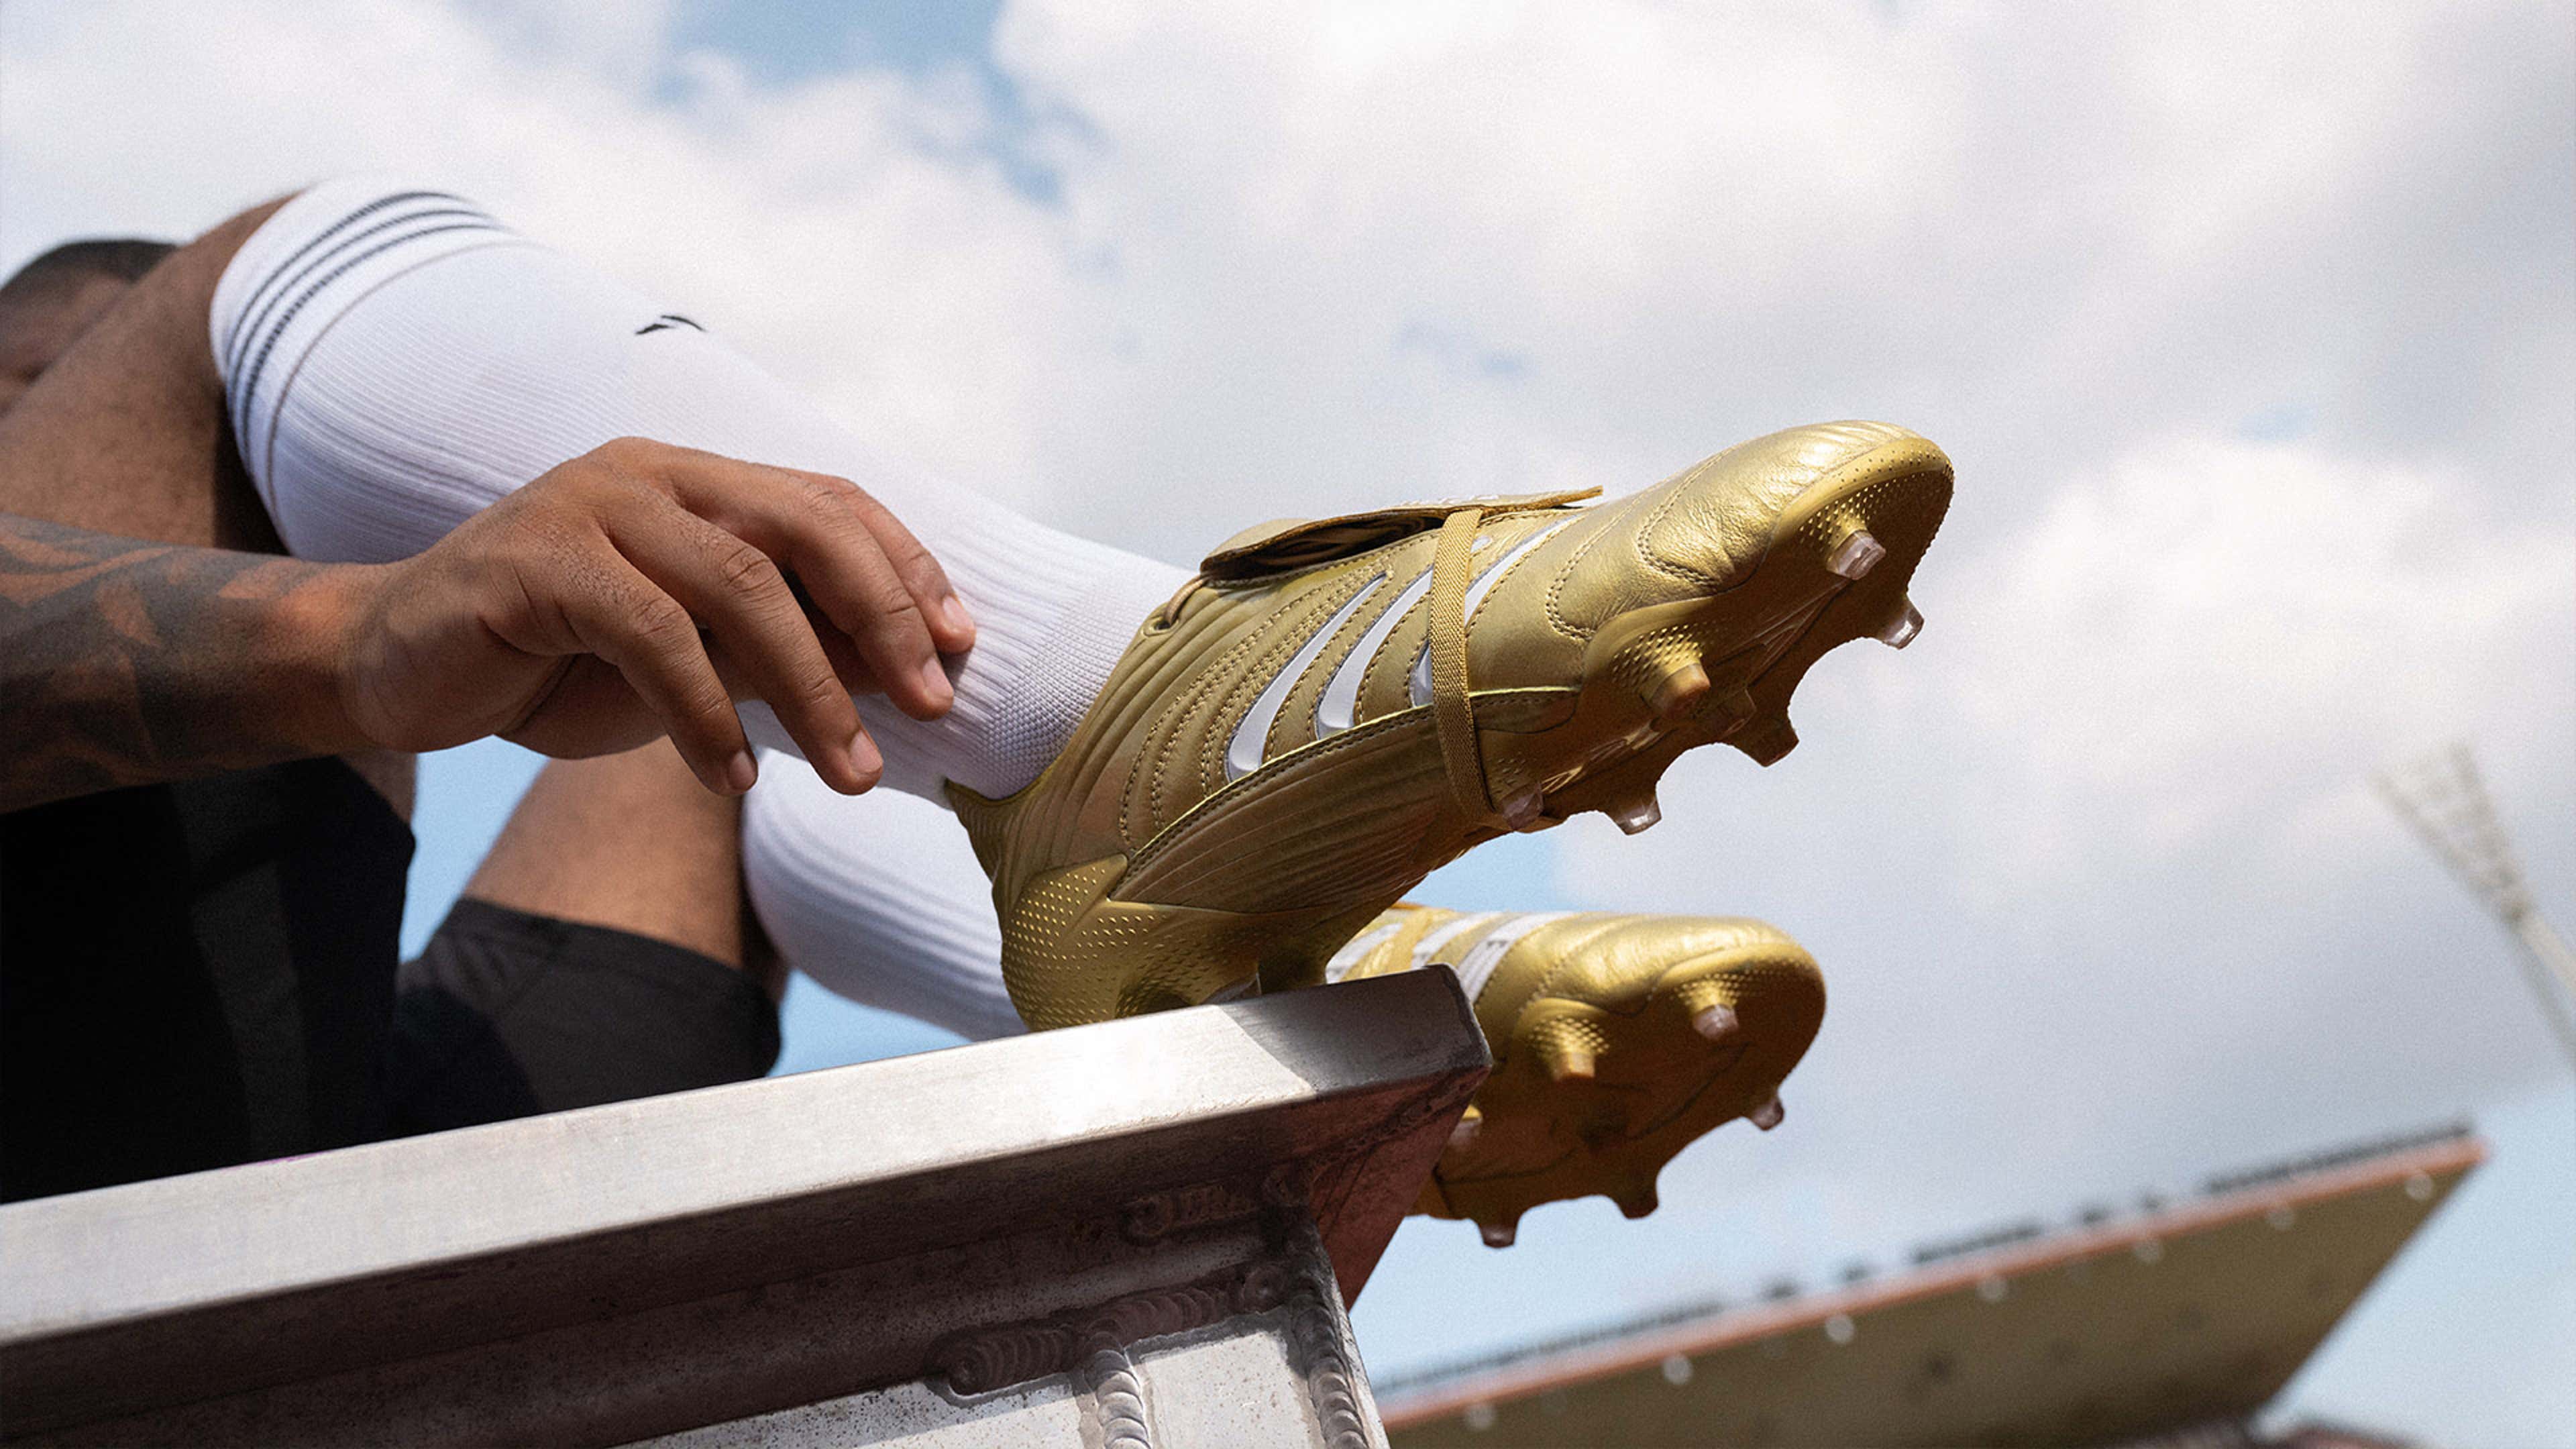 adidas goes for gold with Predator | US